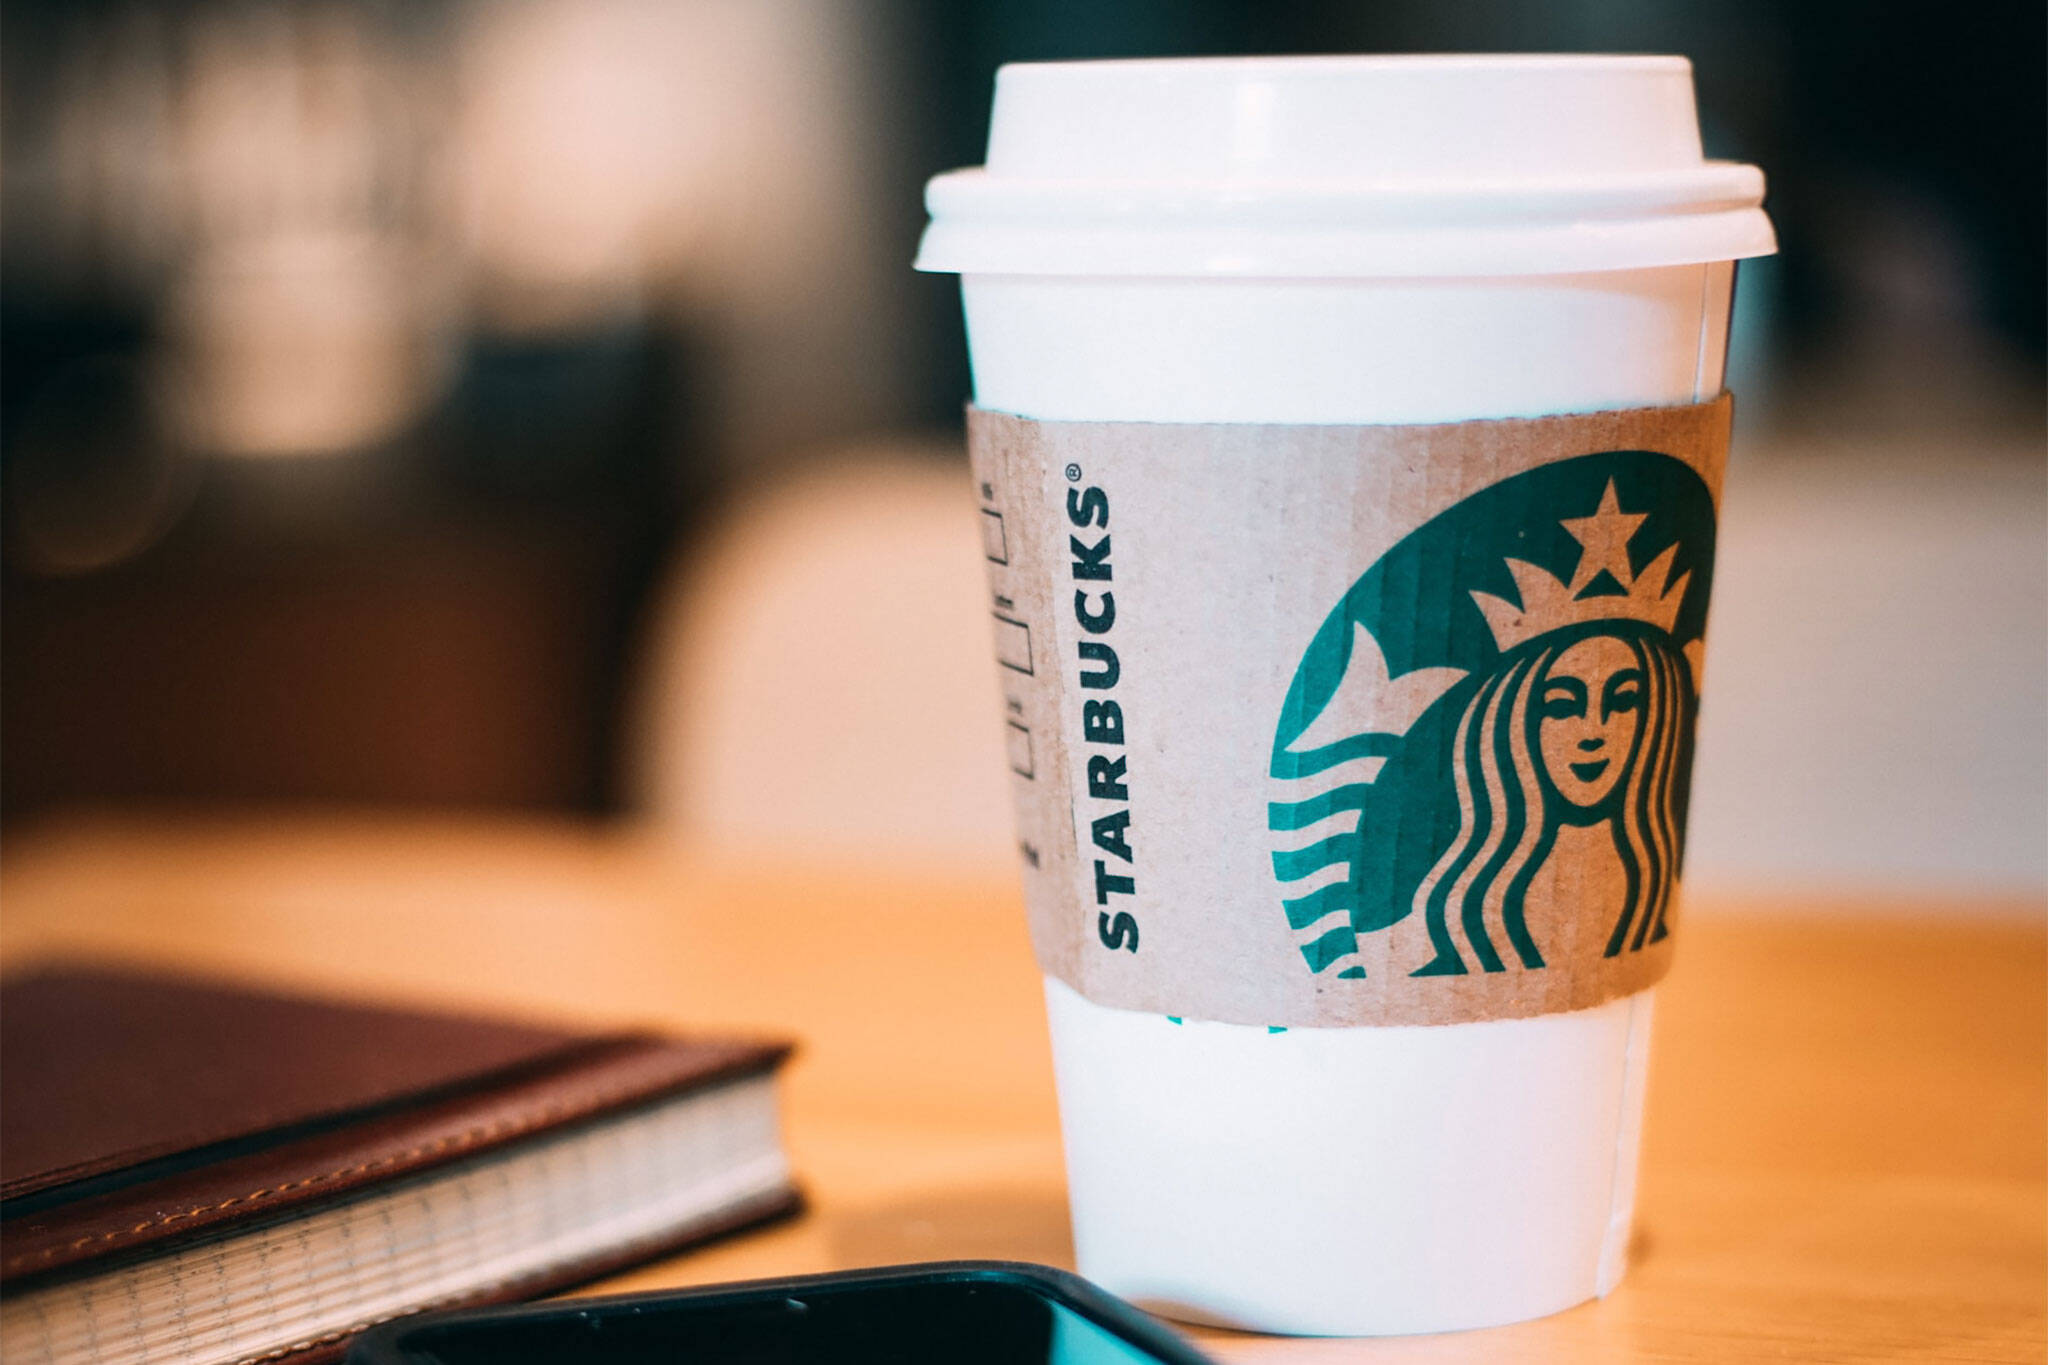 Starbucks is making changes to its rewards program and people are not happy